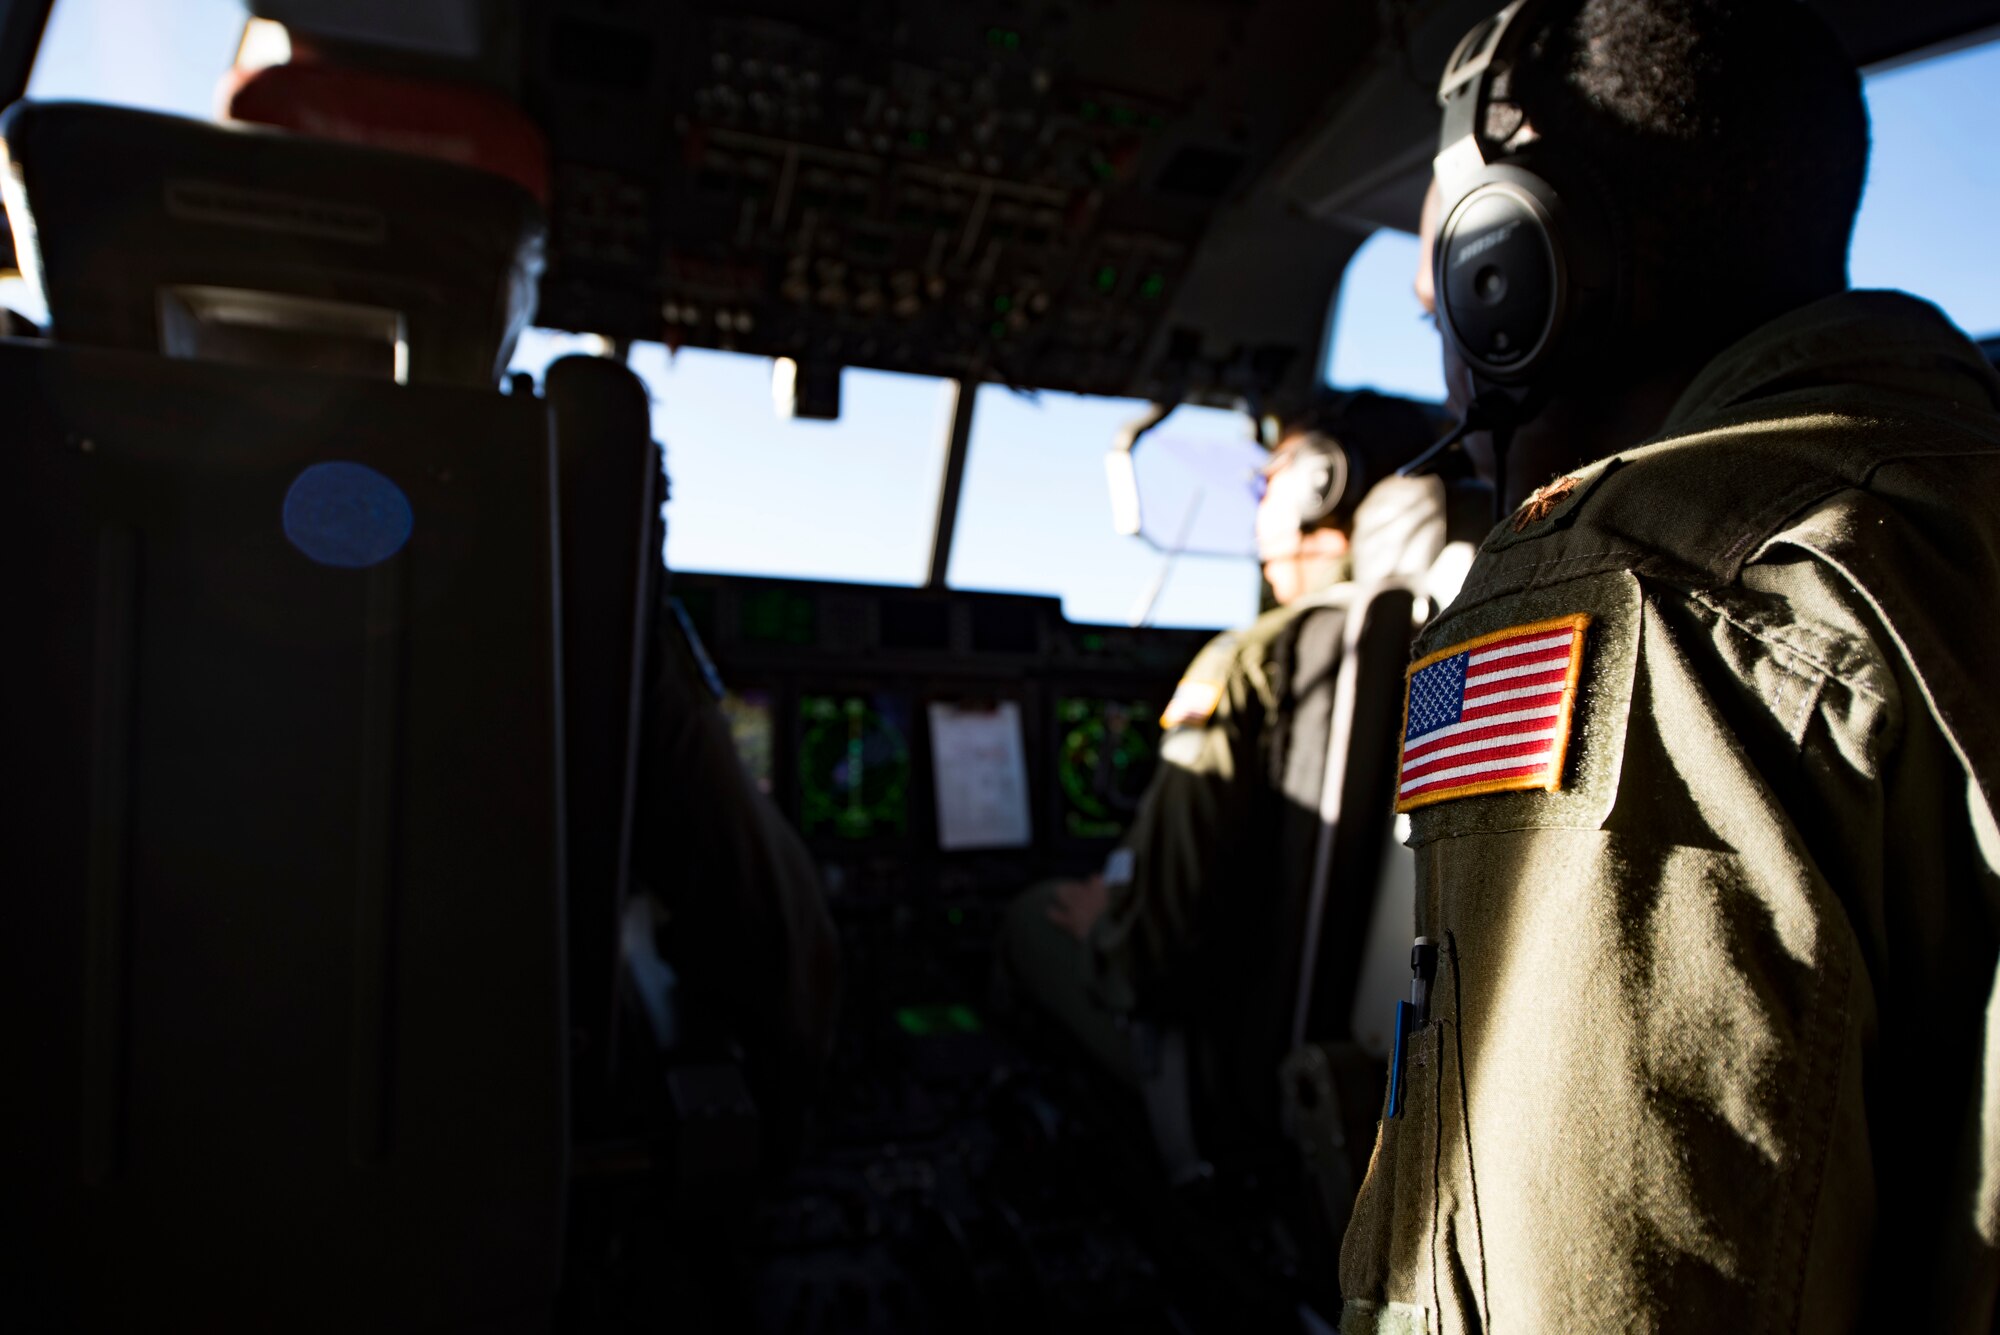 U.S. Air Force Maj. Willie Lloyd, 37th Airlift Squadron director of staff, oversees the manning of the lead C-130J Super Hercules during a training mission over Germany, on July 2, 2018. Once the pilots have led a formation long enough, they are recognized as multi-element flight lead qualified pilots. Multi-element flight lead qualified pilots help ensure the 37th Airlift Squadron is prepared to accomplish one of its primary missions: aerial delivery and mass on the drop-zone.